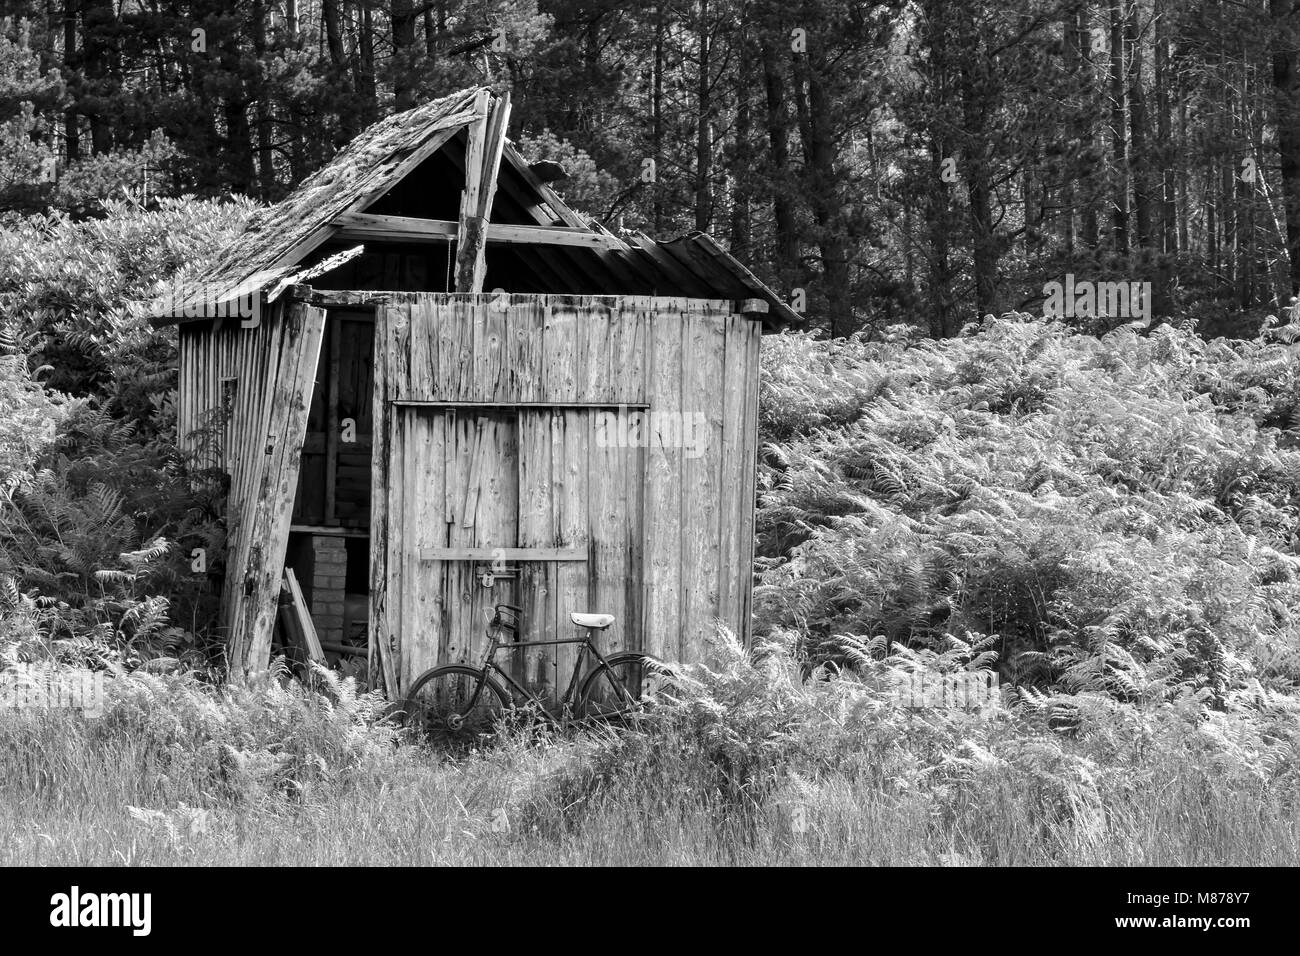 Black and White image of a derelict wooden shed with old bicycle leaning  up by the door Stock Photo